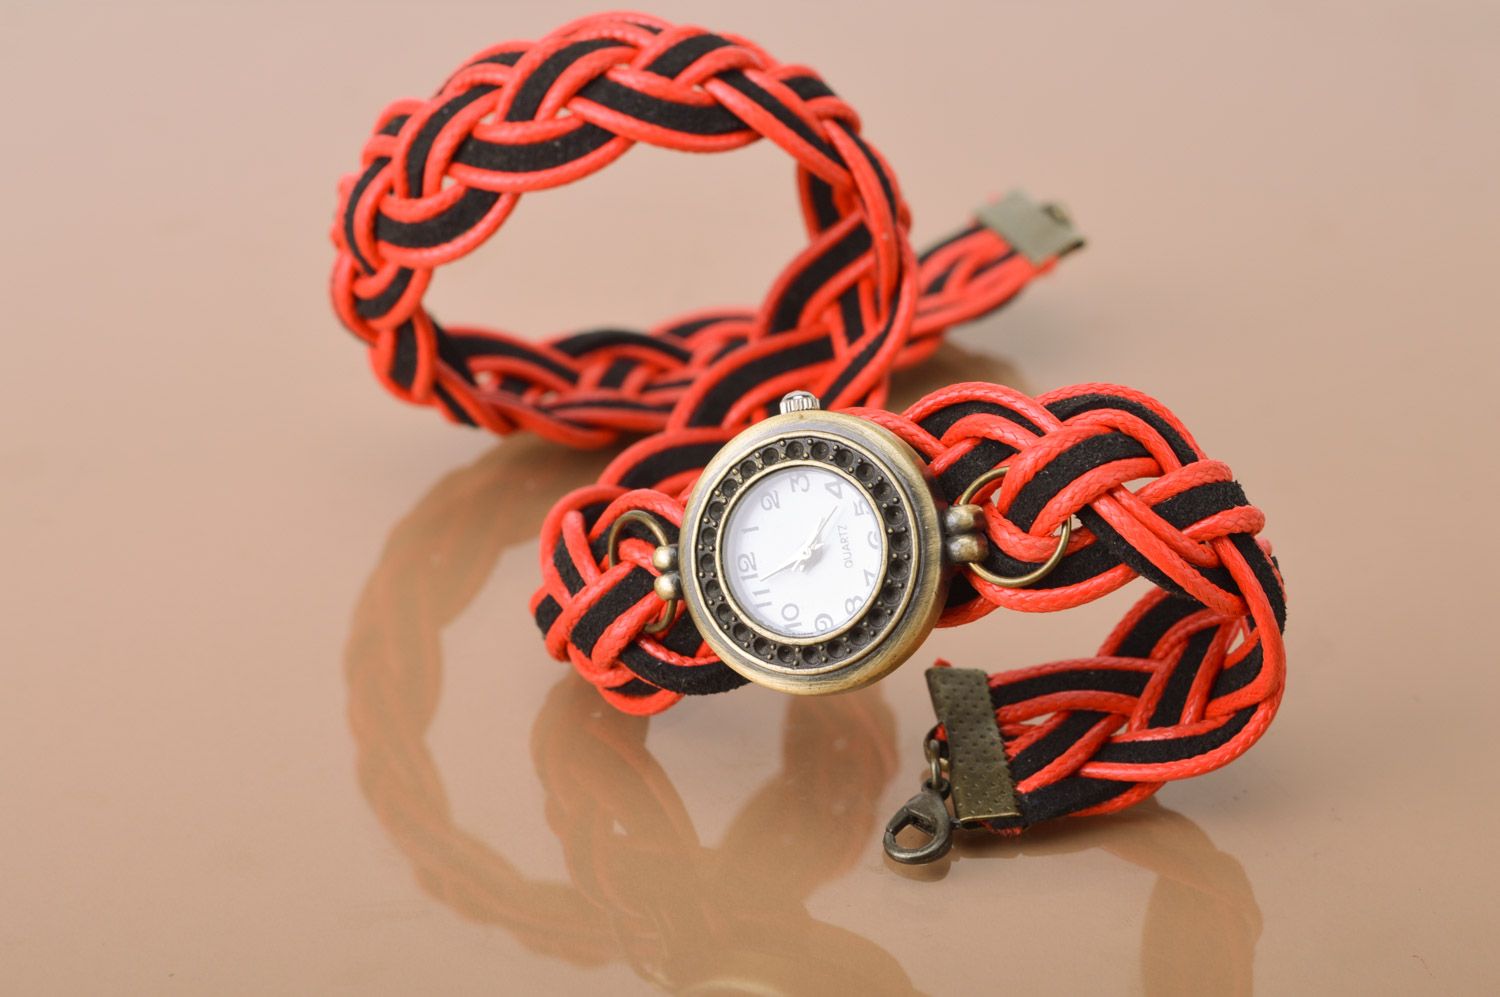 Handmade wrist watch with double wrap woven red and black bracelet for women photo 2